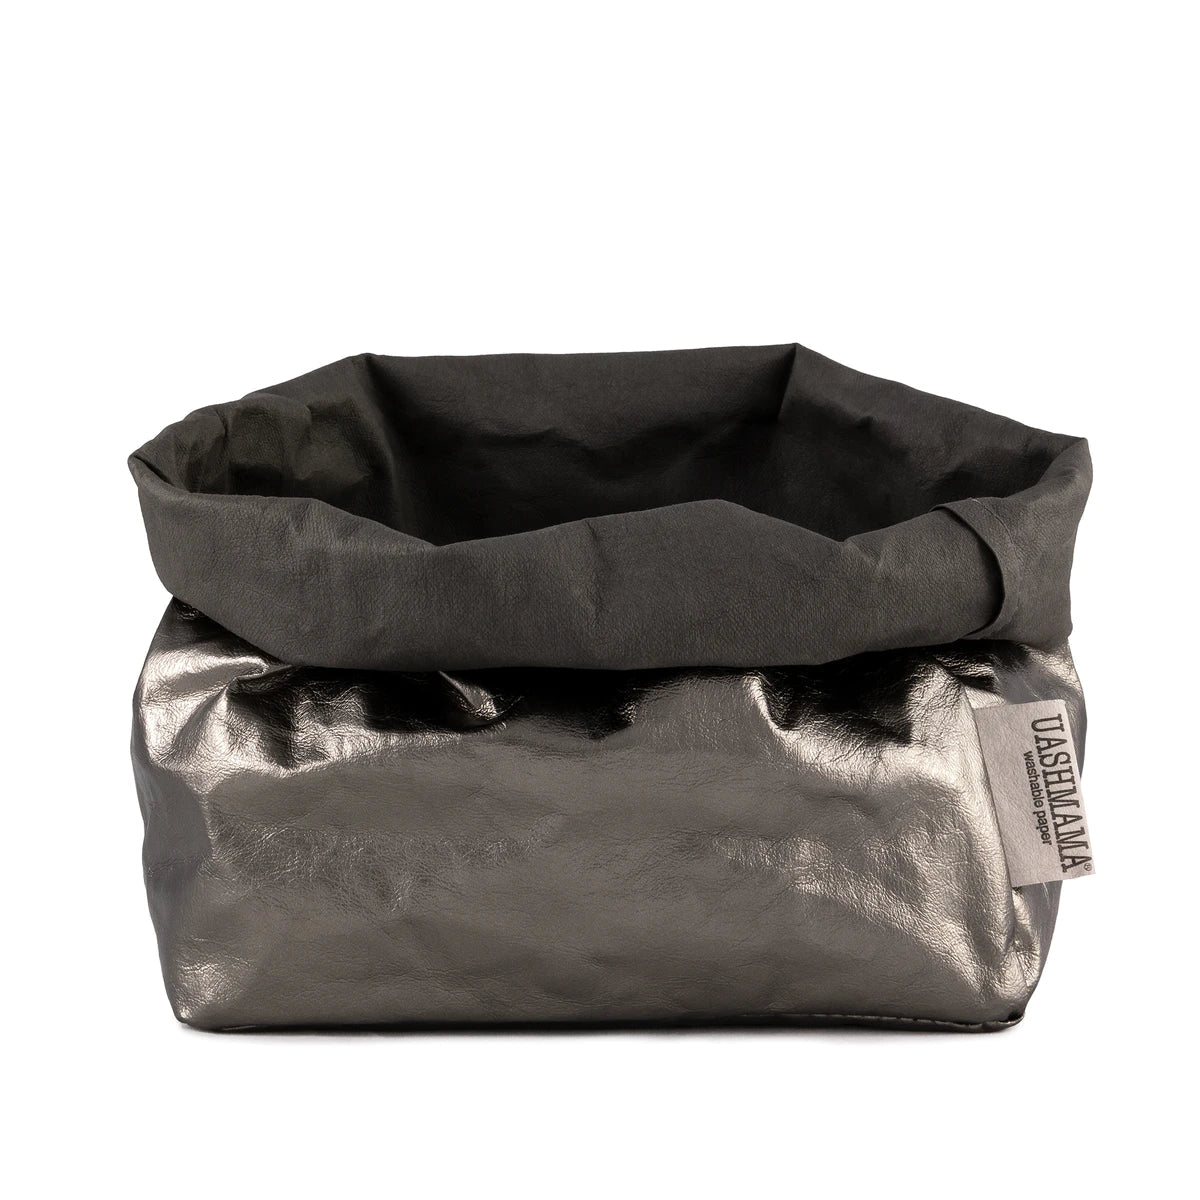 A washable paper bag is shown. The bag is rolled down at the top and features a UASHMAMA logo label on the bottom left corner. The bag pictured is the large size in metallic dark grey.